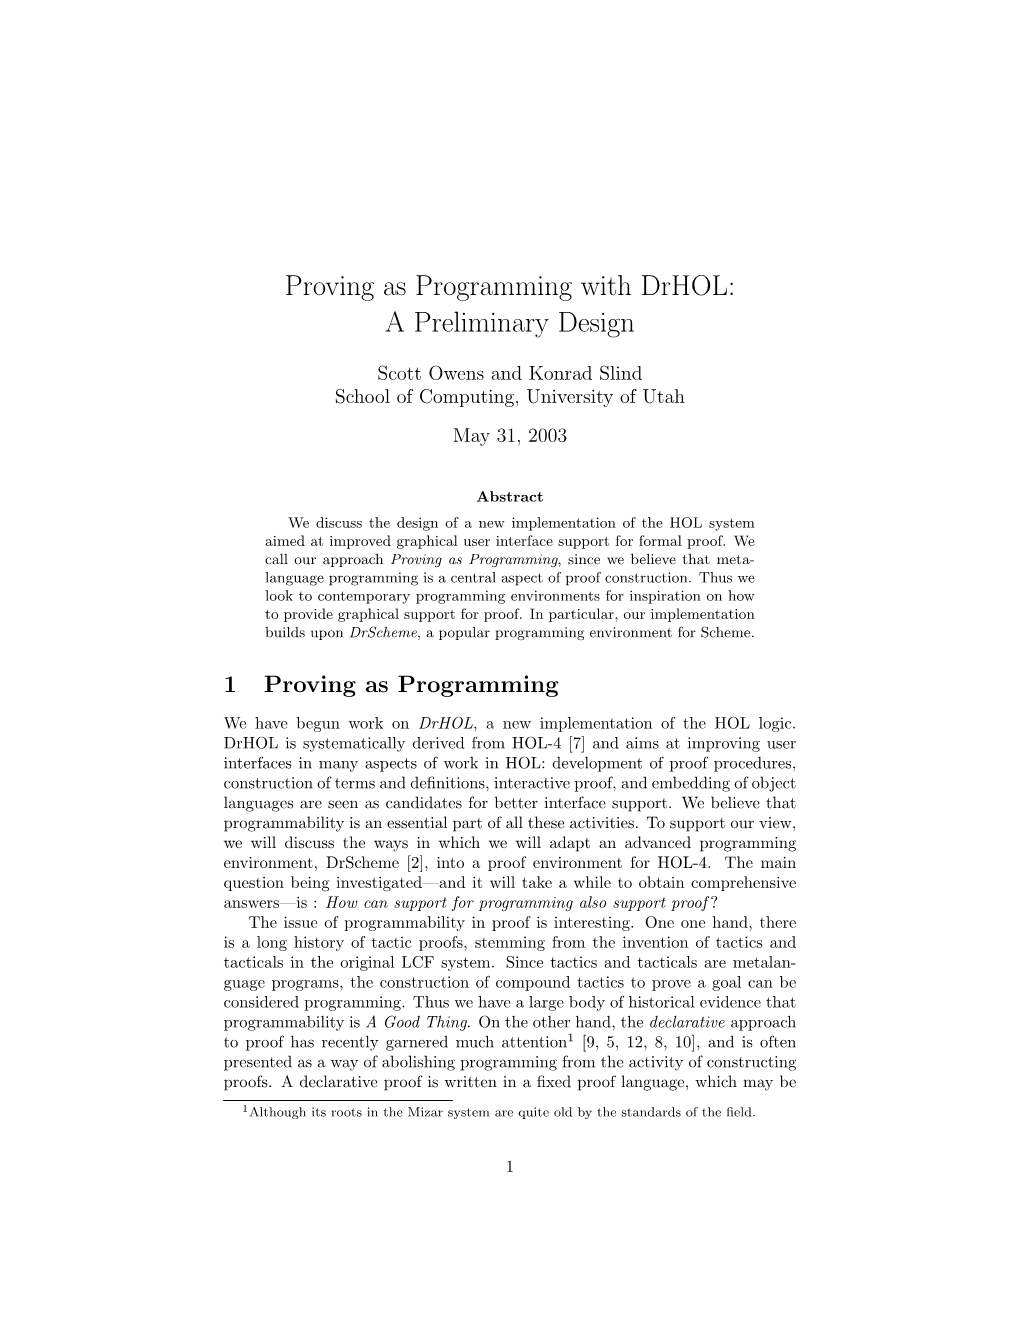 Proving As Programming with Drhol: a Preliminary Design